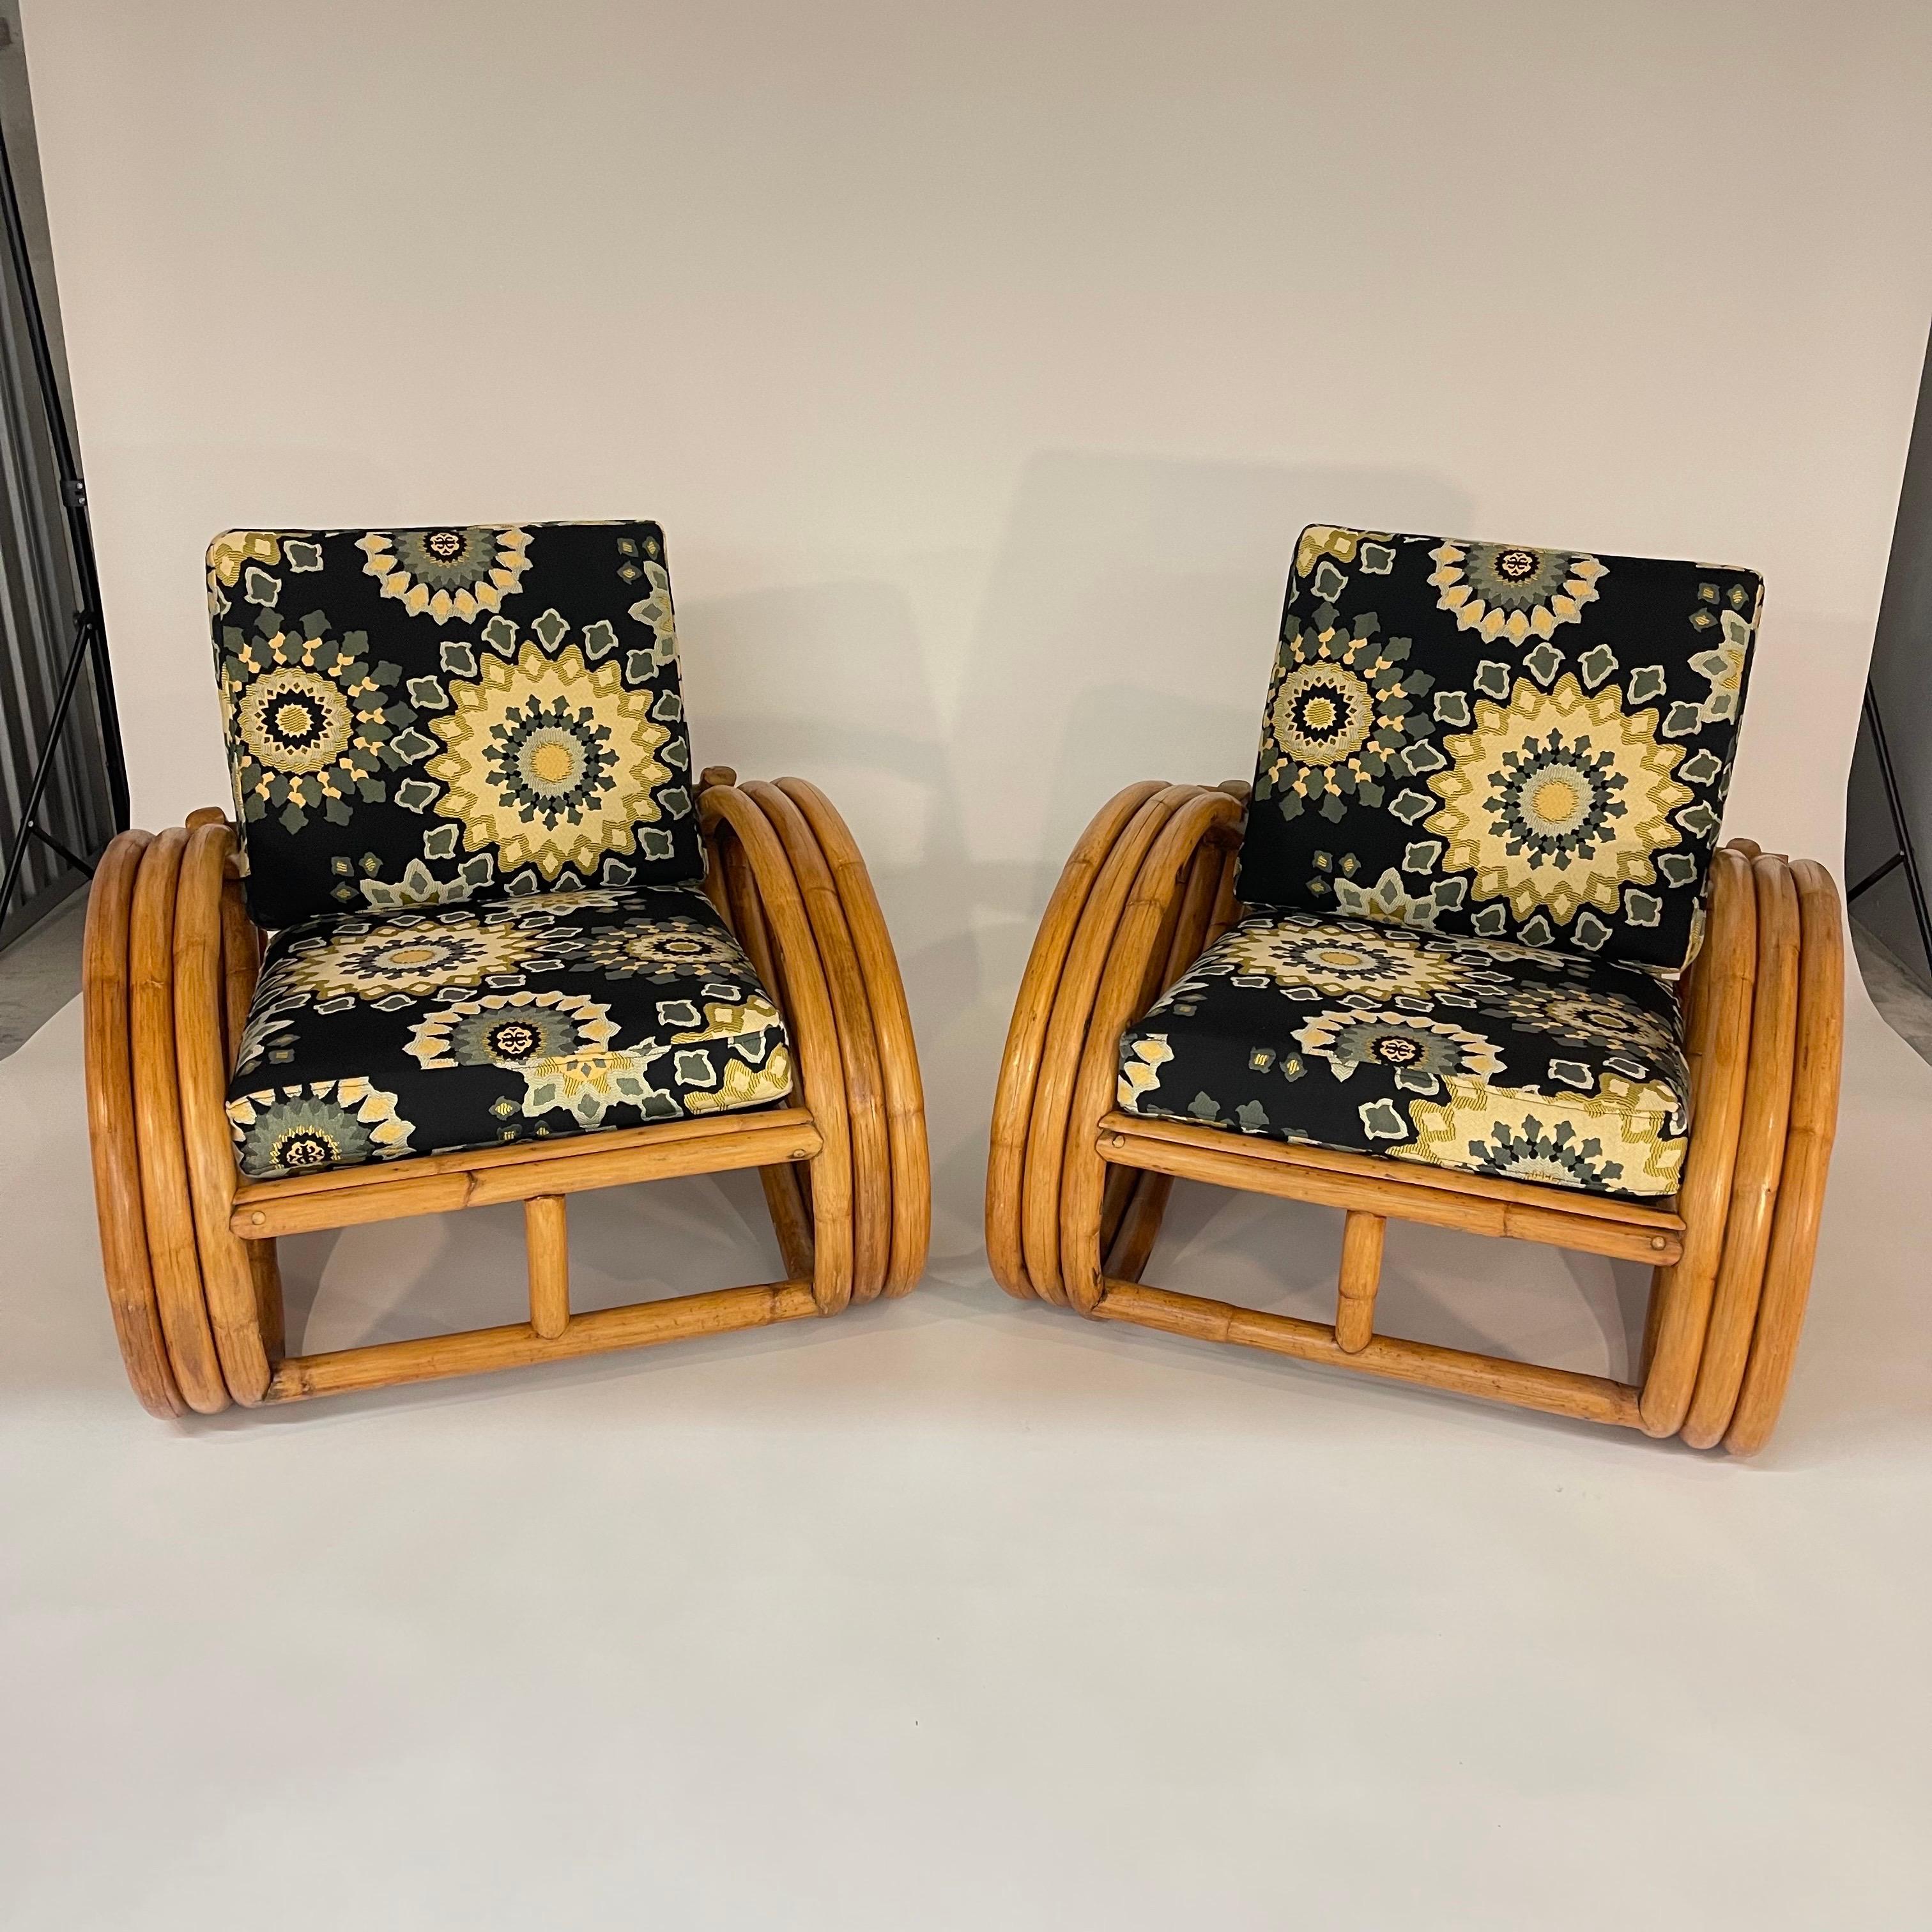 Unique Vintage Art Deco Three Band Rattan Pretzel Club Lounge or Armchairs, rendered in bent rattan frame, recently reupholstered in a Moroccan print high end woven fabric with a jute webbing base and adjustable three position back, in the style of